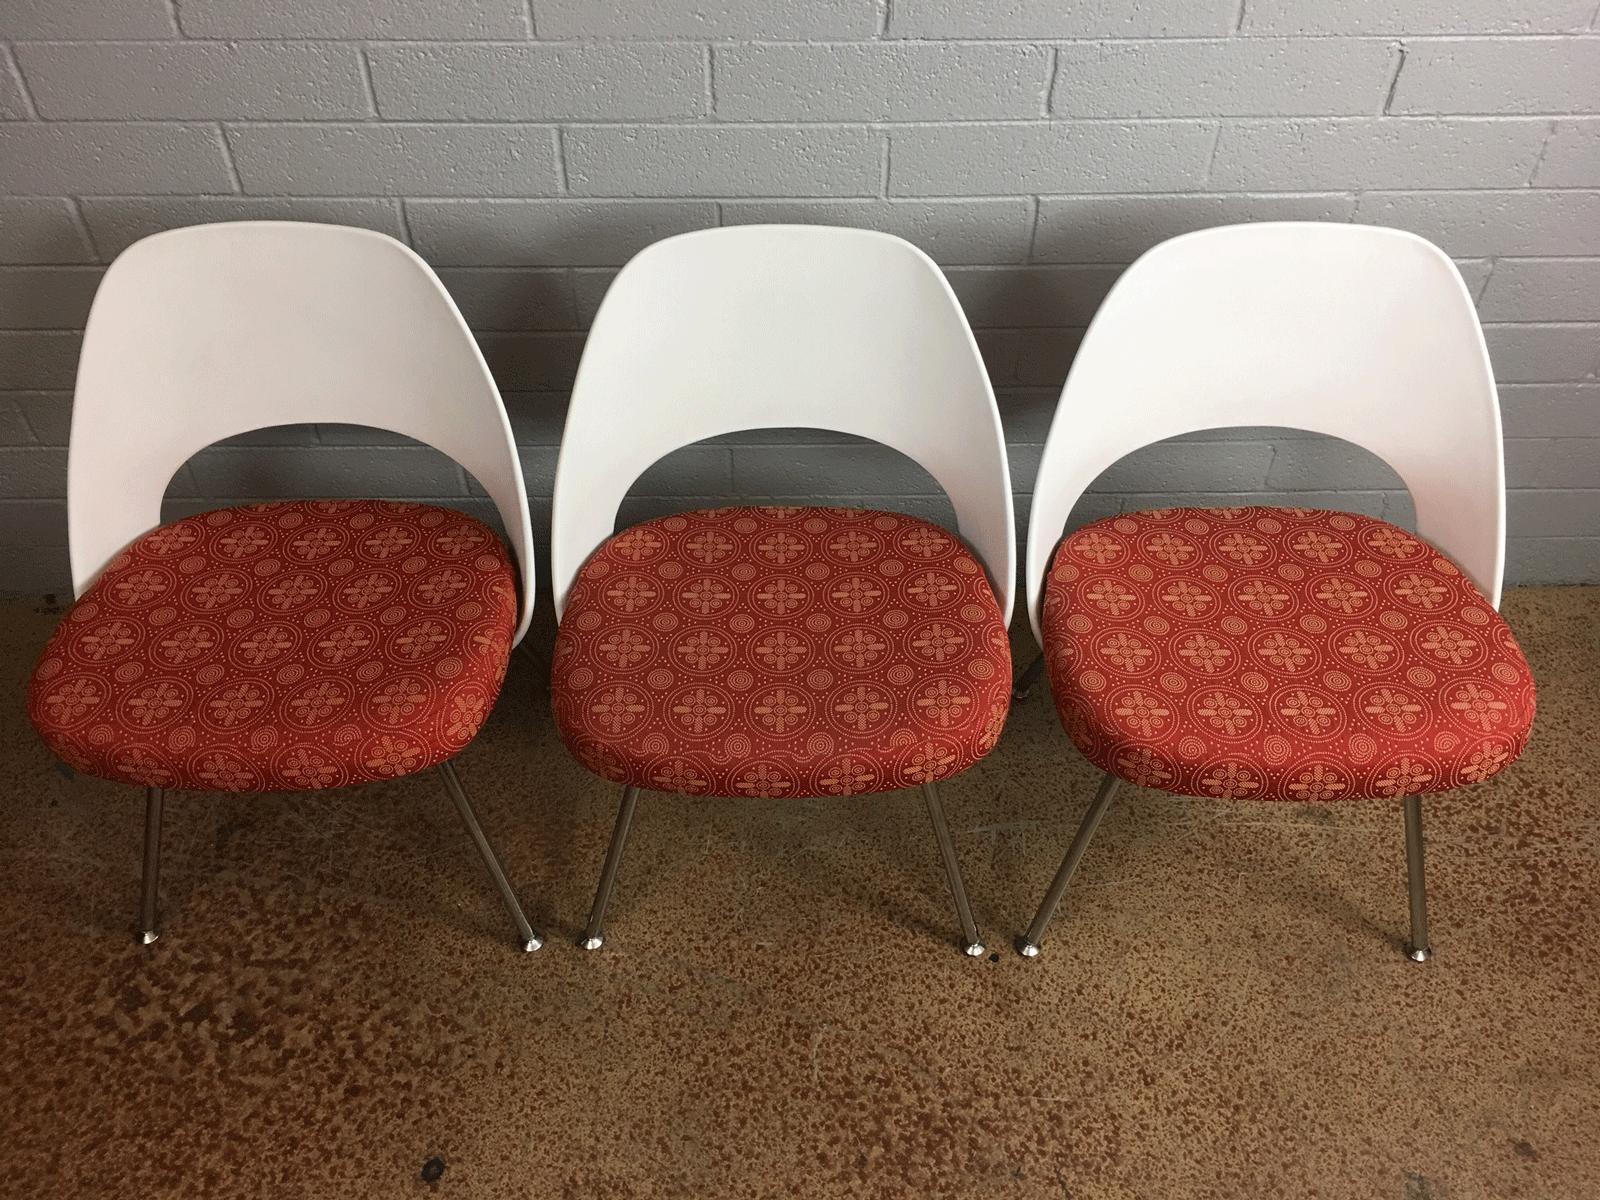 Iconic set of three chairs by Eero Saarinen. Manufactured in 2006. Original fabric. Knoll. Very good condition.